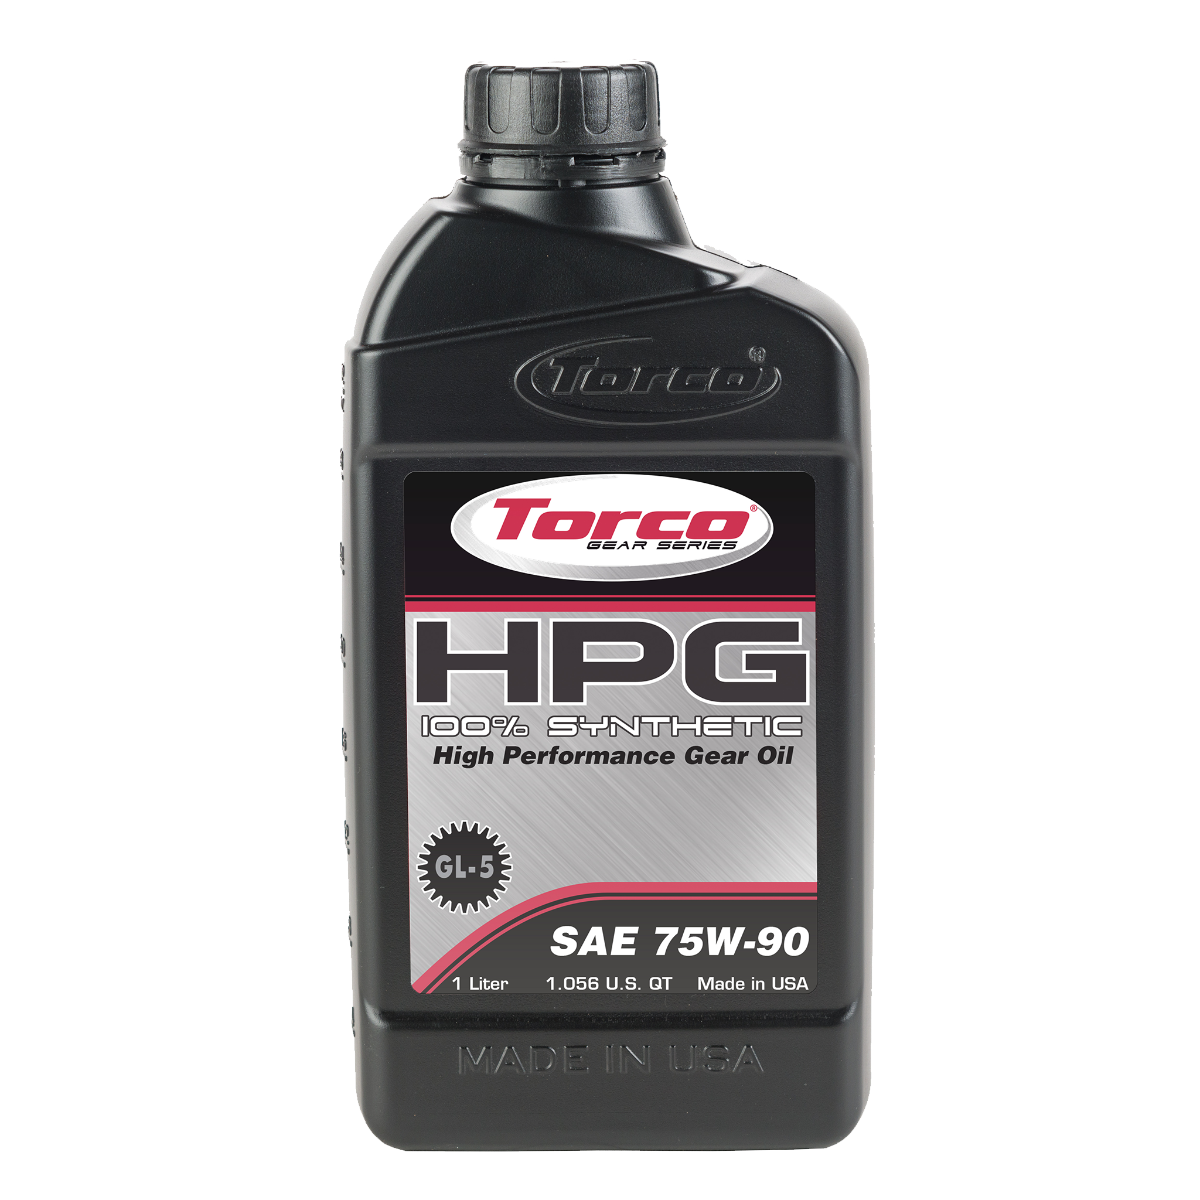 Torco HPG High Performance 100% Synthetic Gear Oil - TorcoUSA